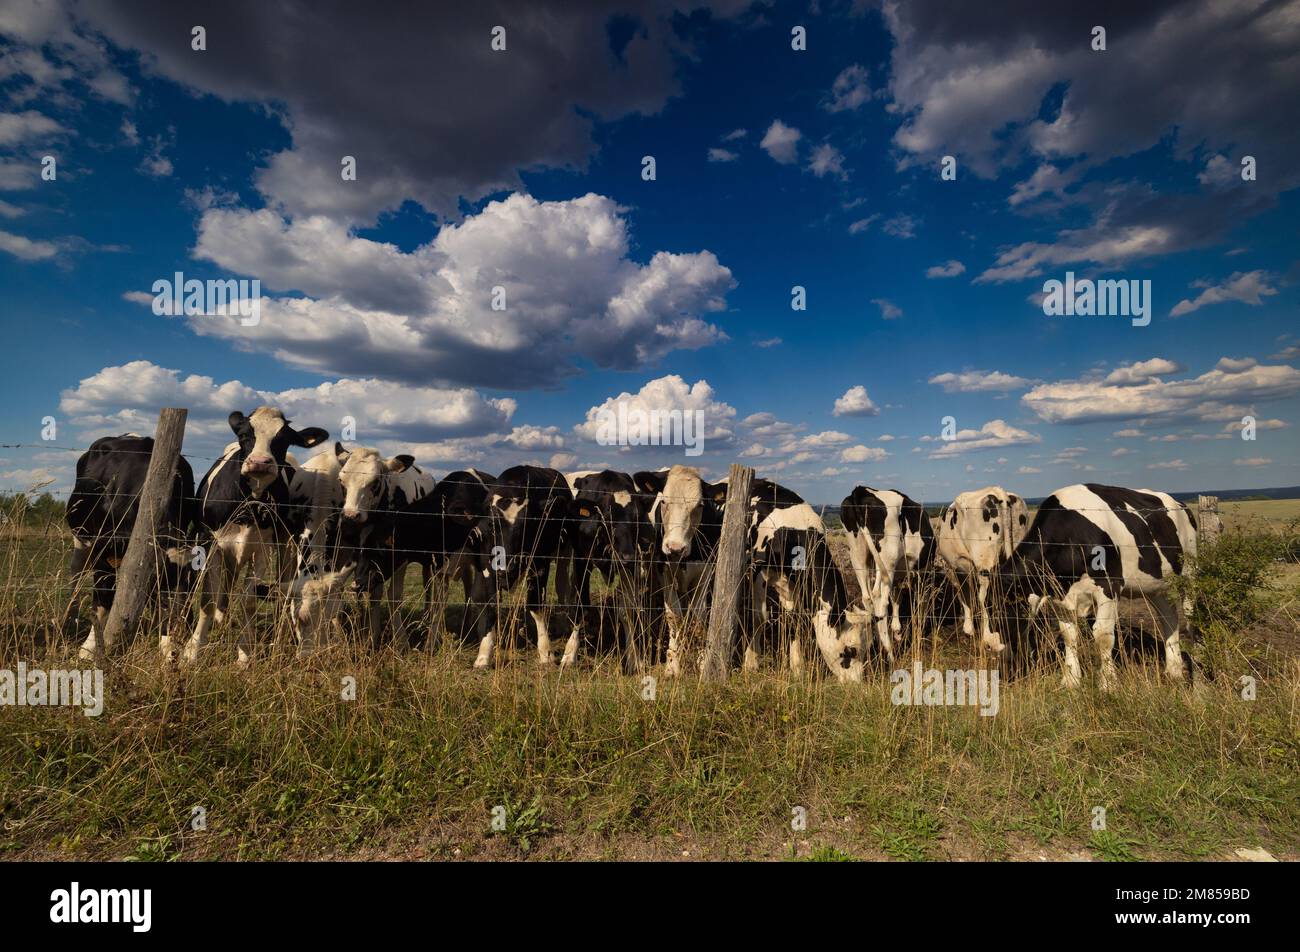 A herd of cows Along Road D90 [Route Departementale 90] from Lorquin to Hattigny Grand Est in north-eastern France. Stock Photo